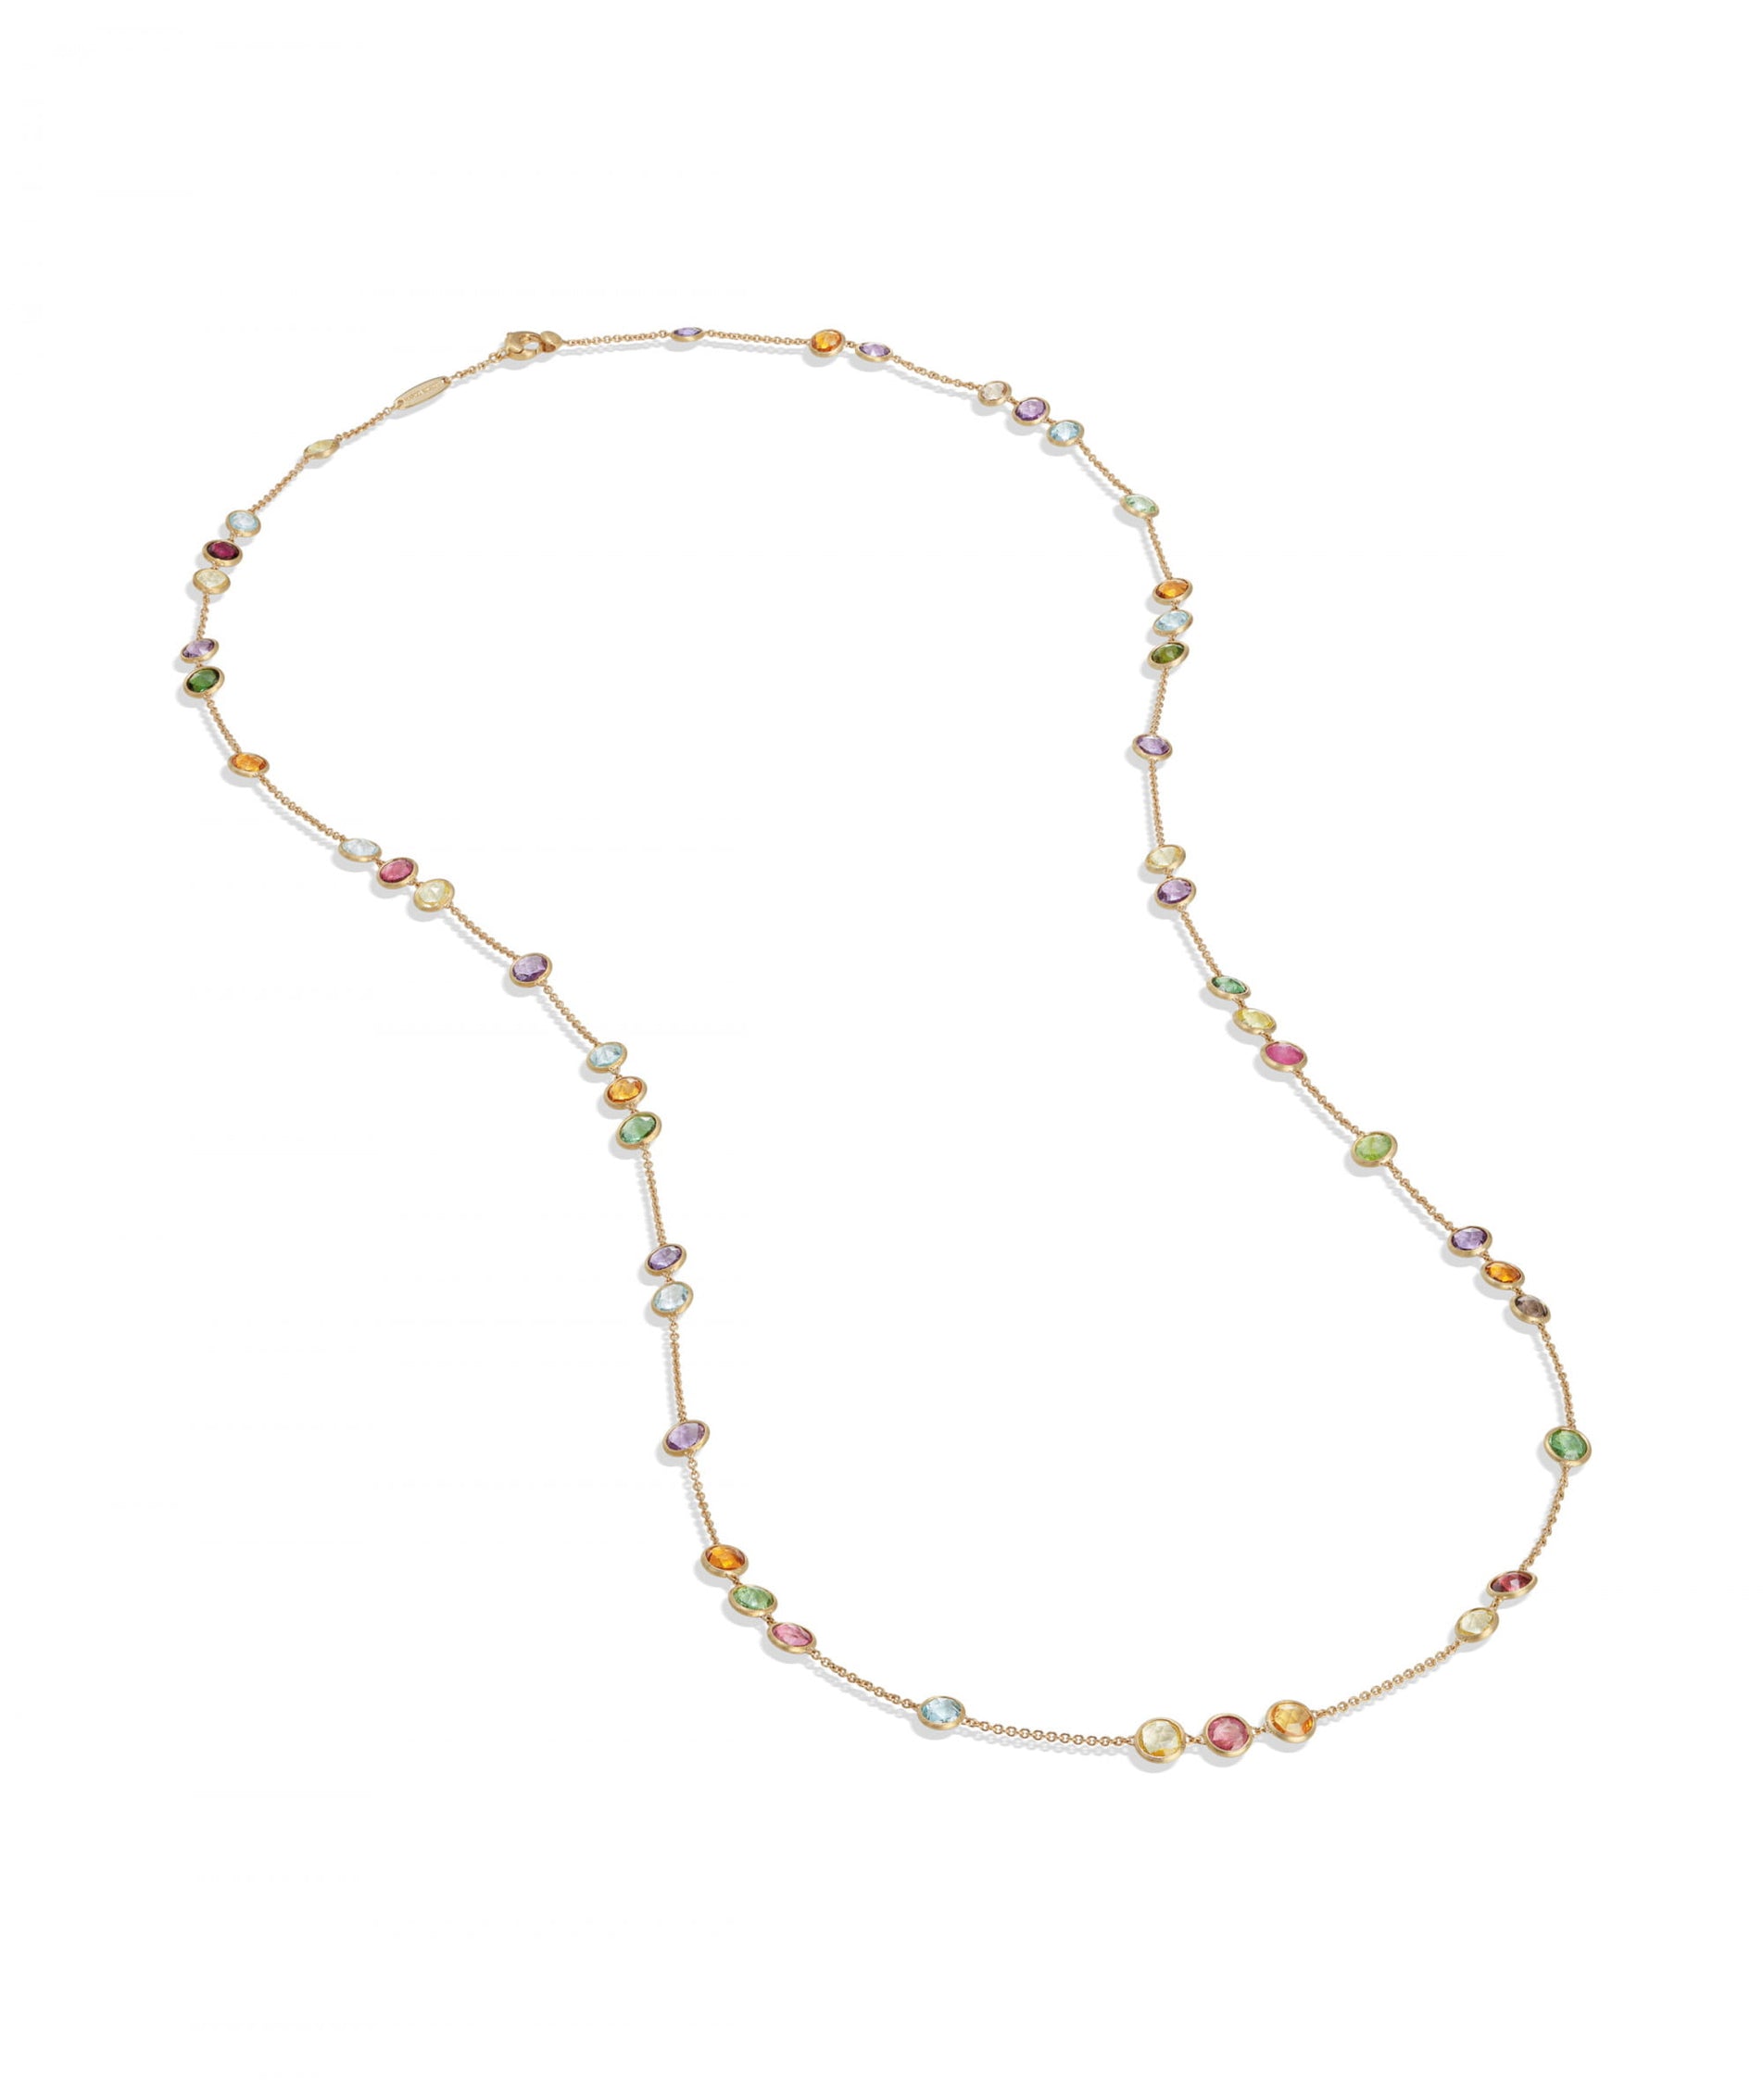 Jaipur Colour Necklace in 18k Yellow Gold with Mixed Gemstones Long - Orsini Jewellers NZ